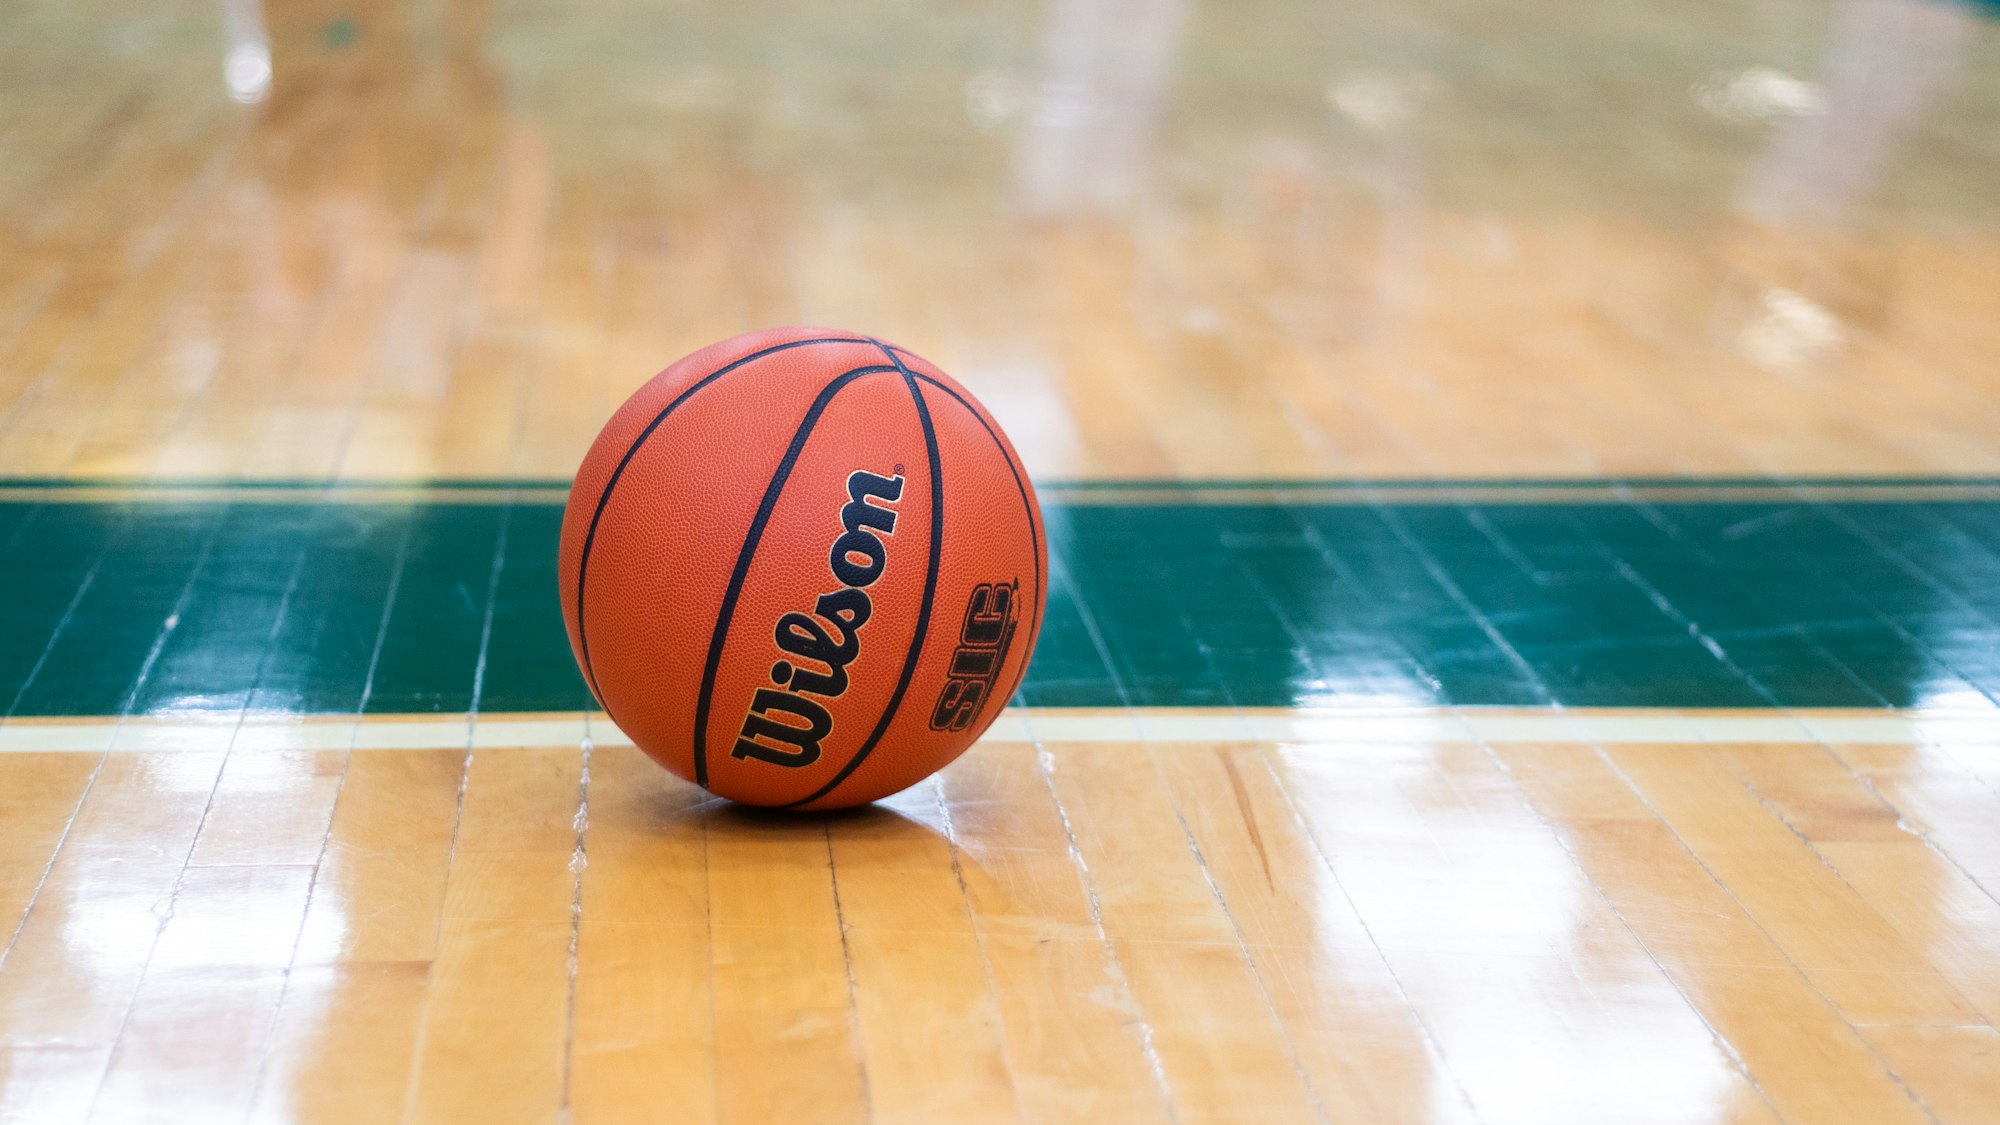 Student Life department scores with intramural basketball